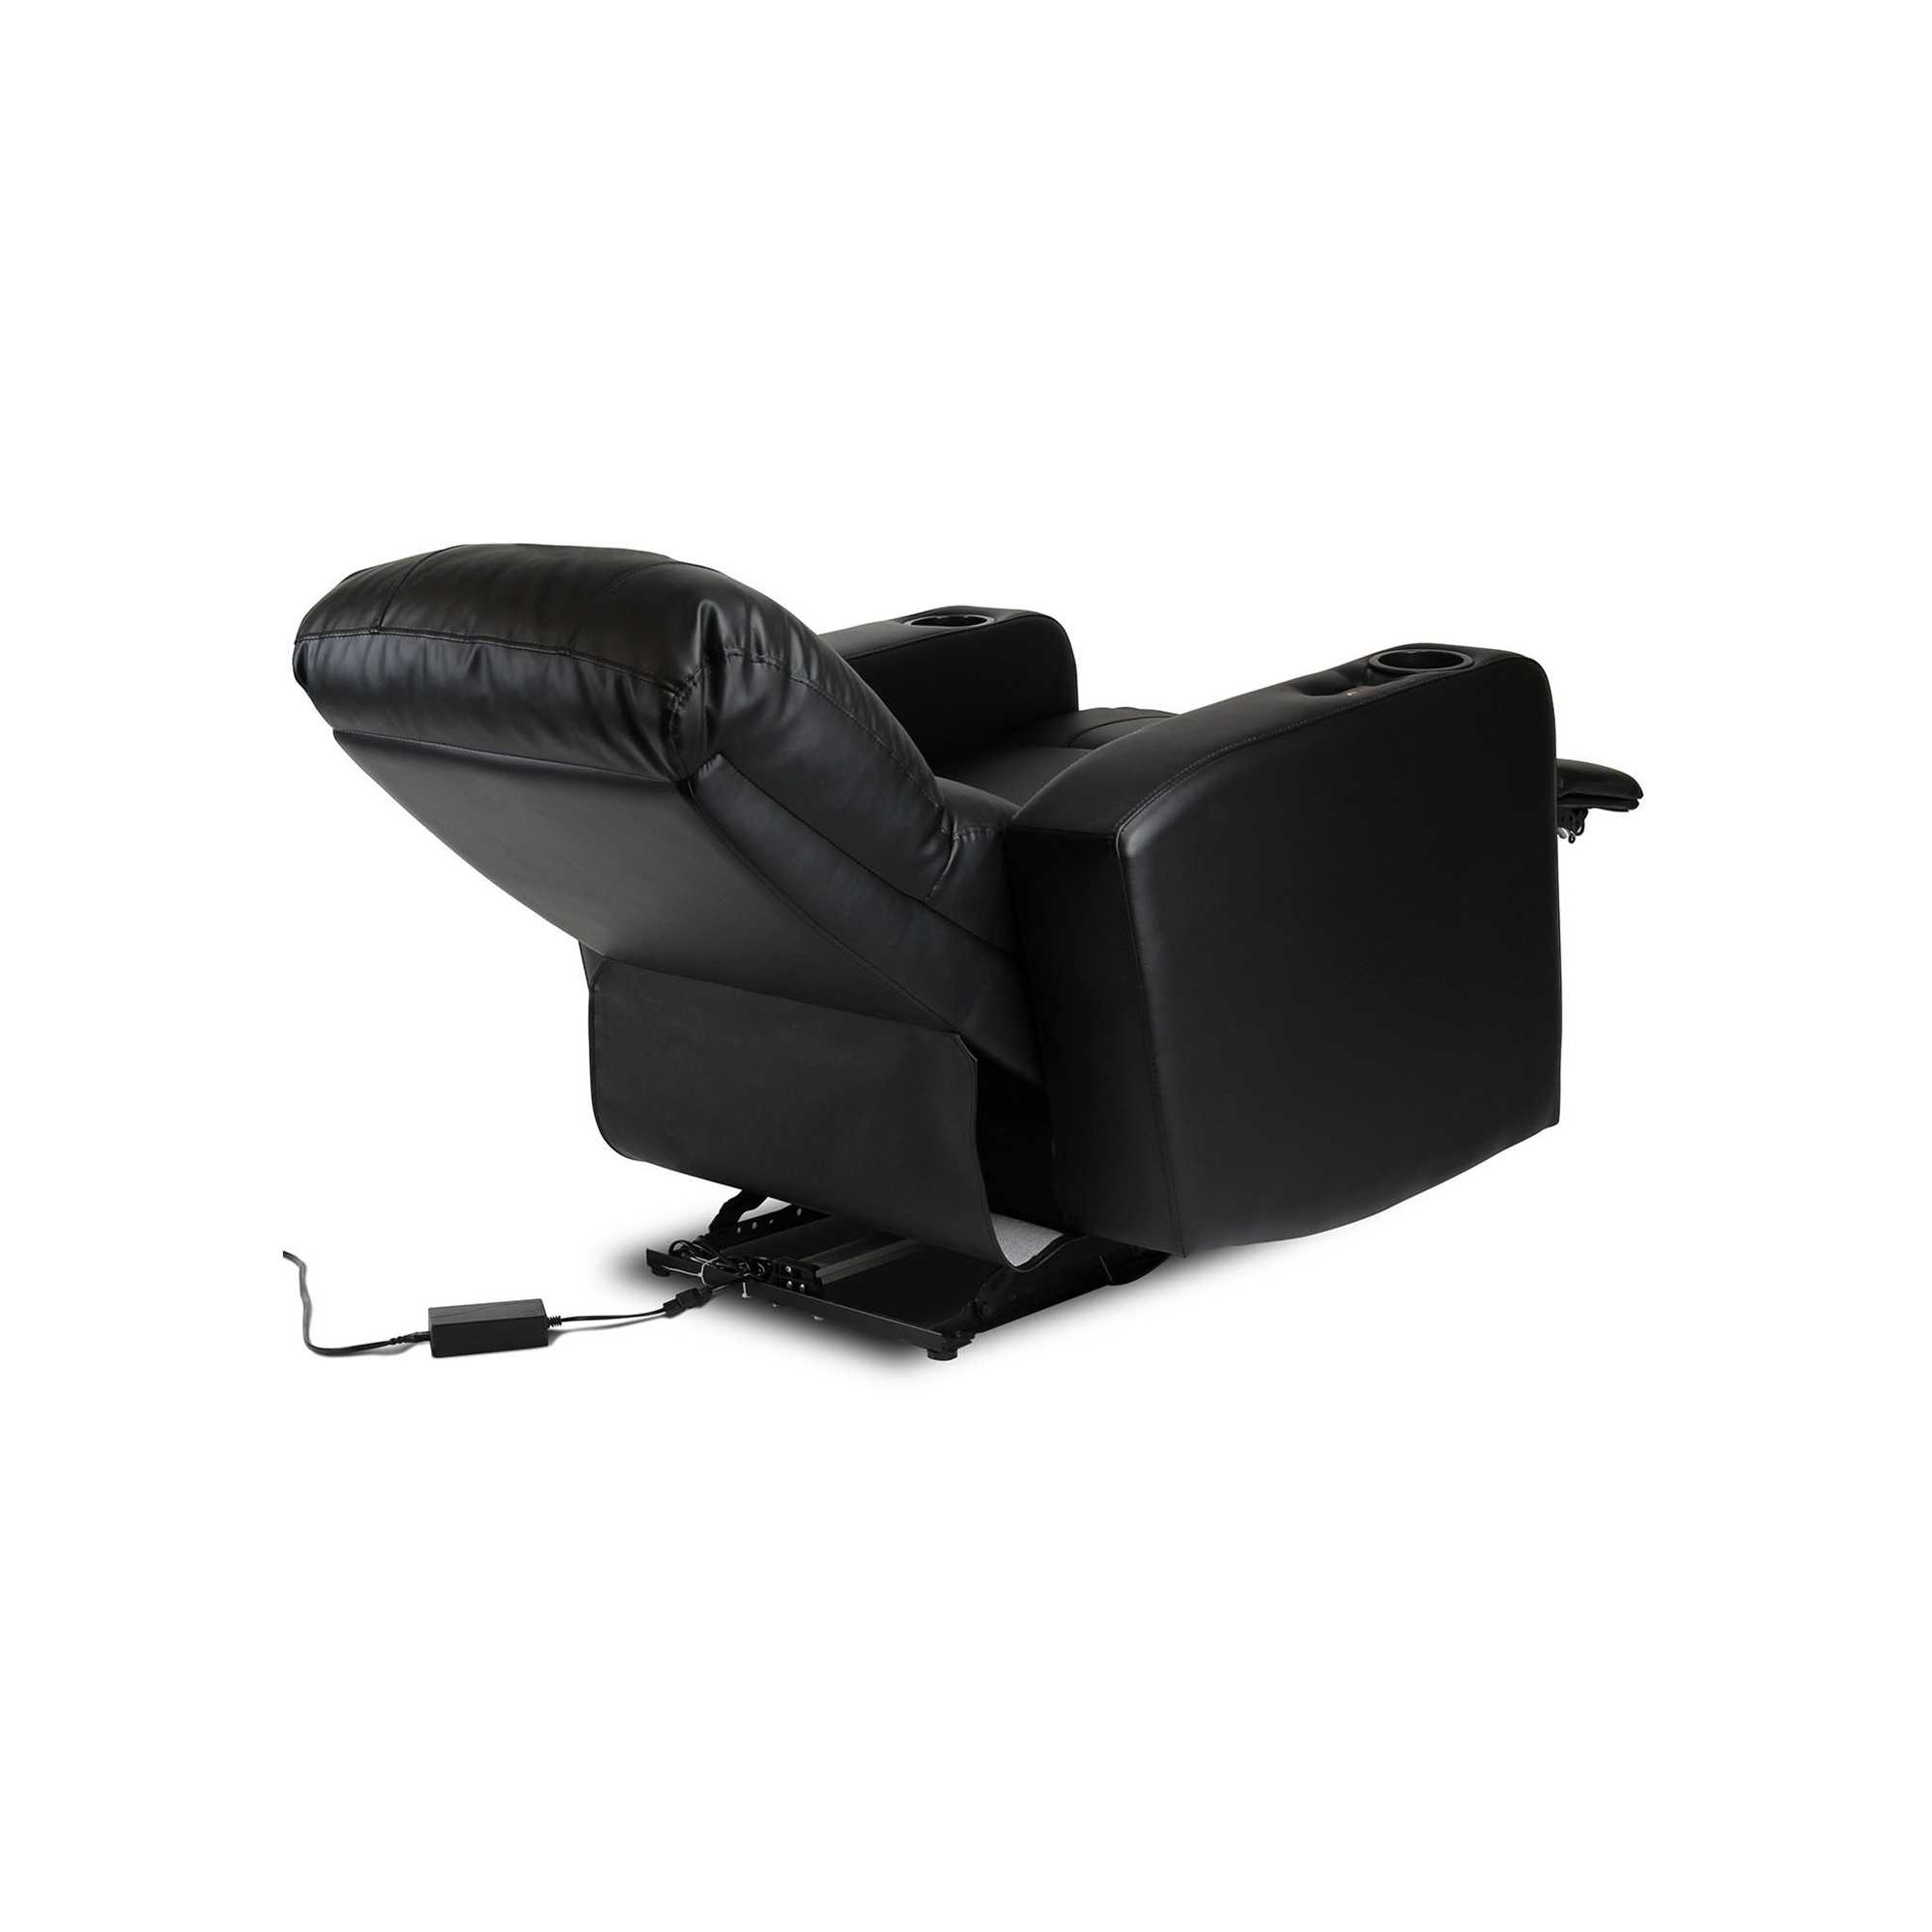 OHIO STATE POWER THEATER RECLINER